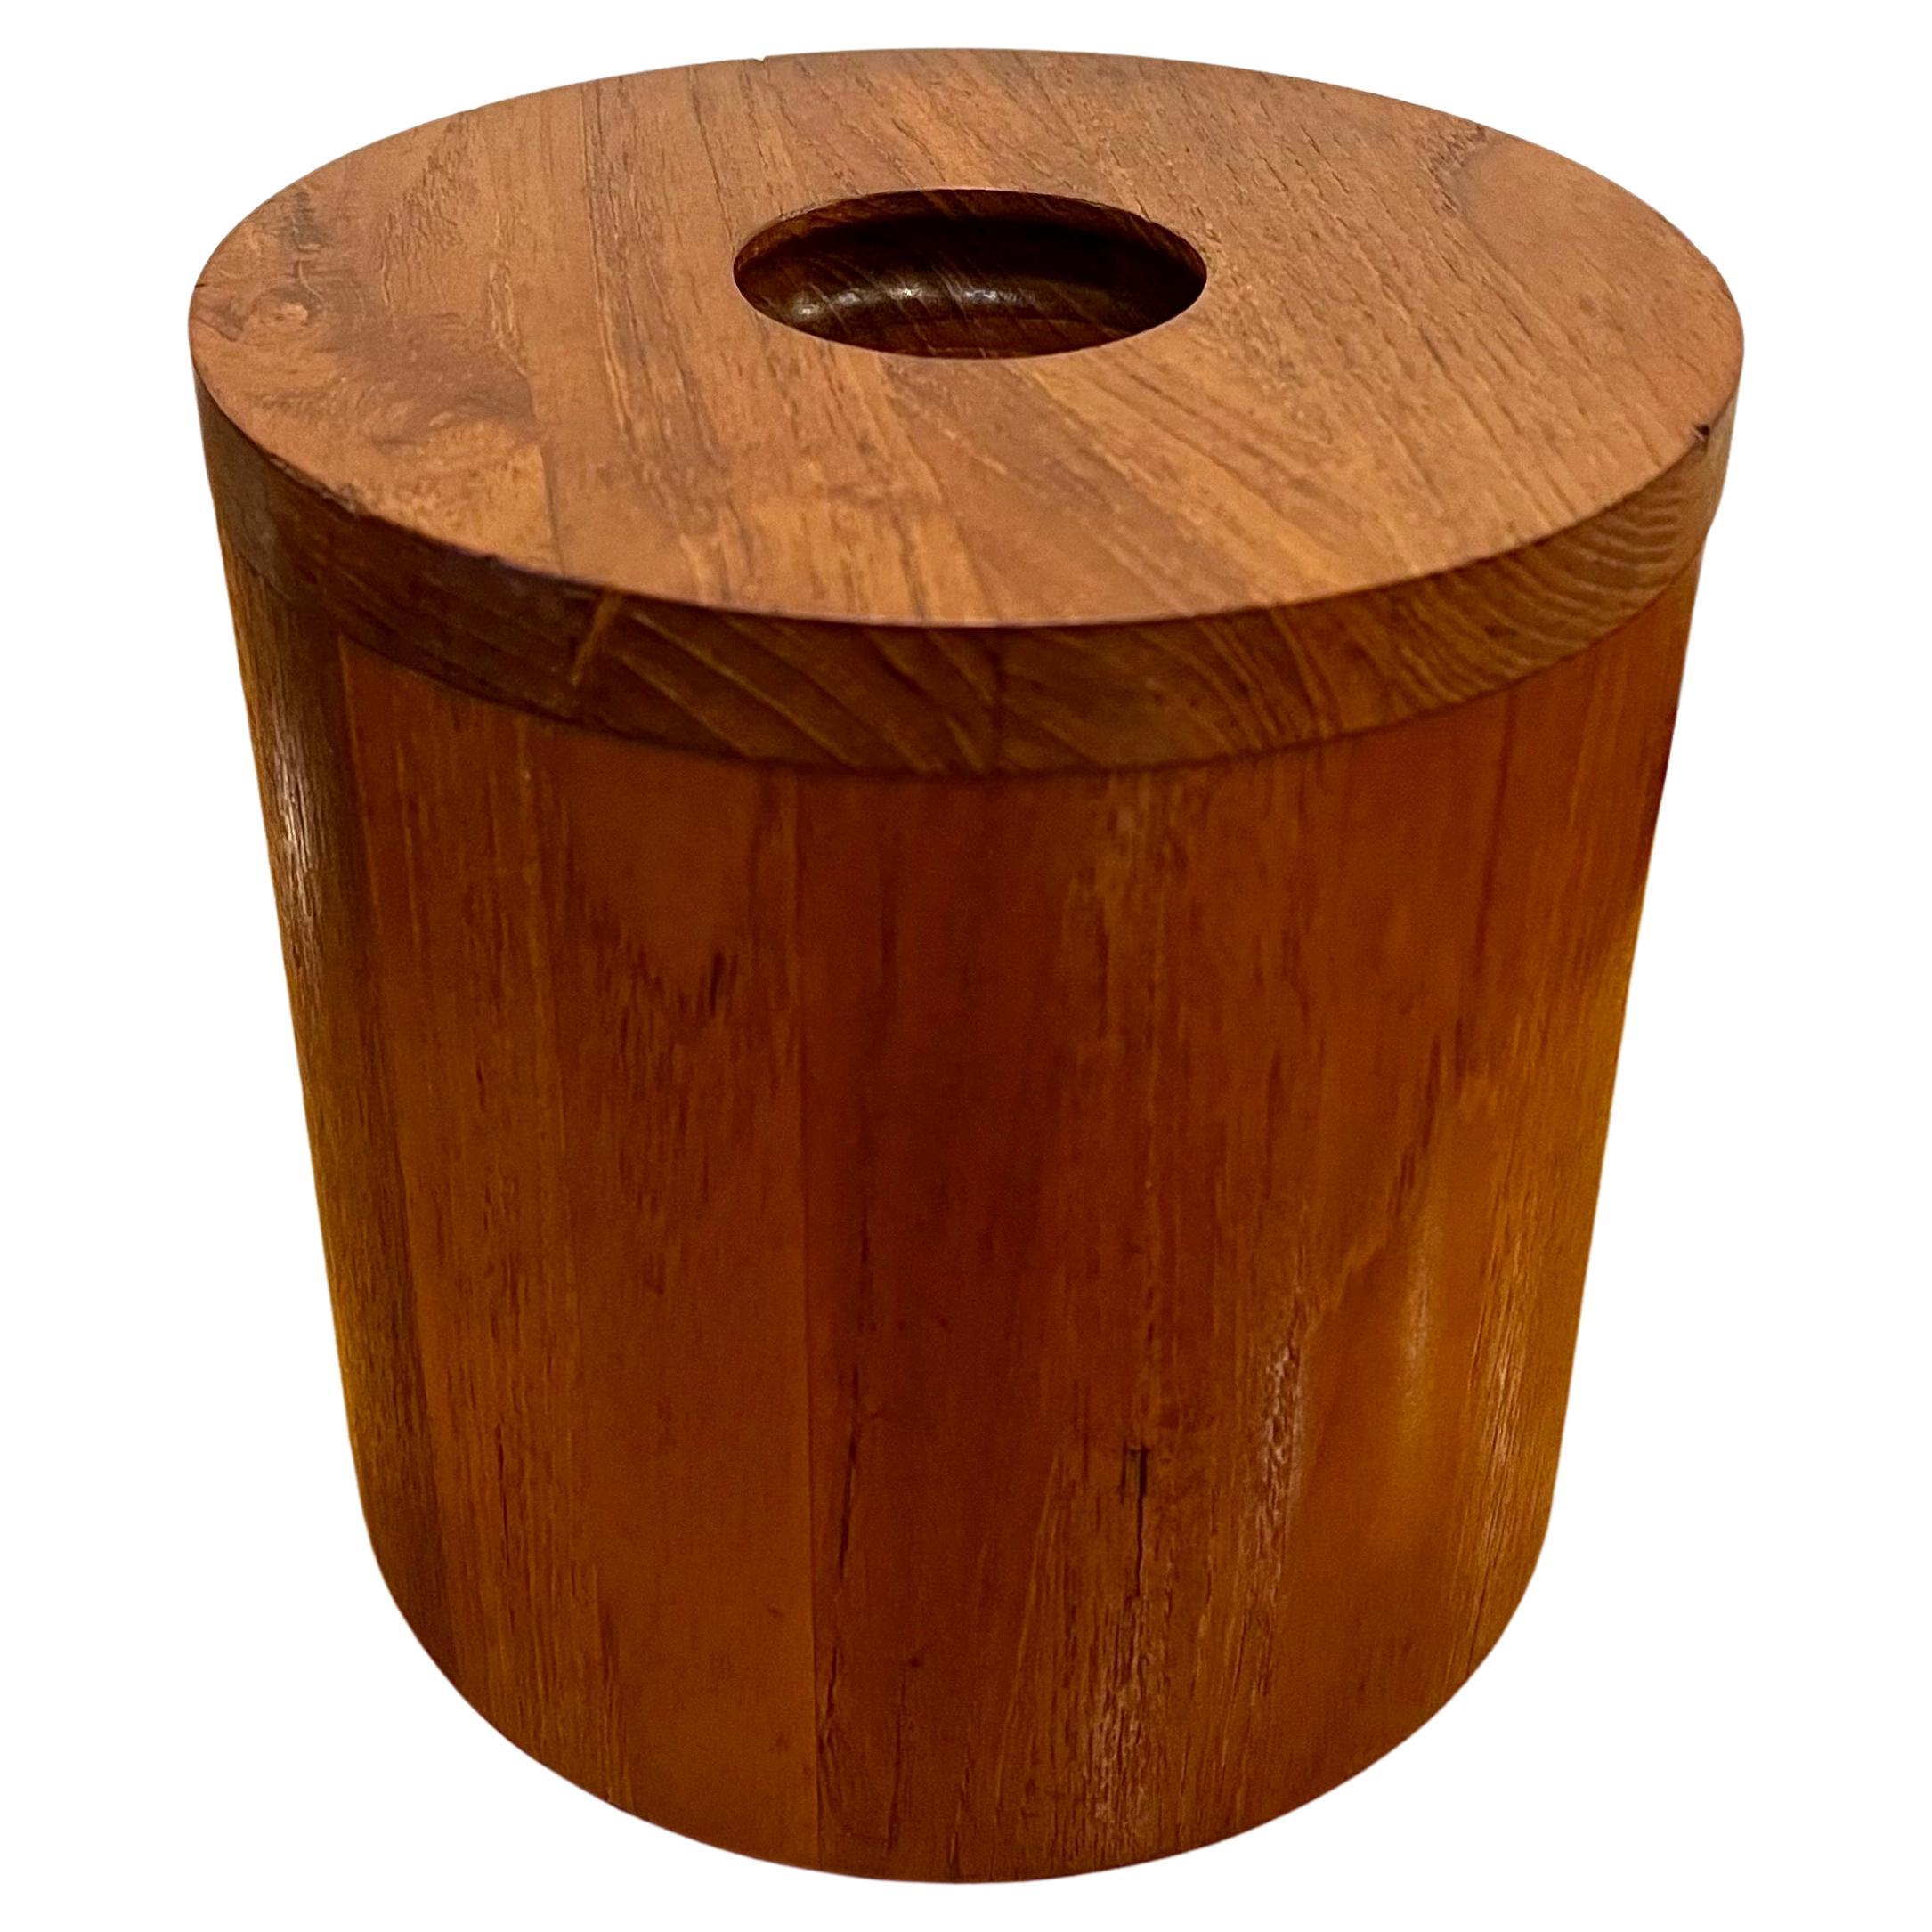 Rare solid teak ice bucket with plastic insert circa 1970s great condition and design.